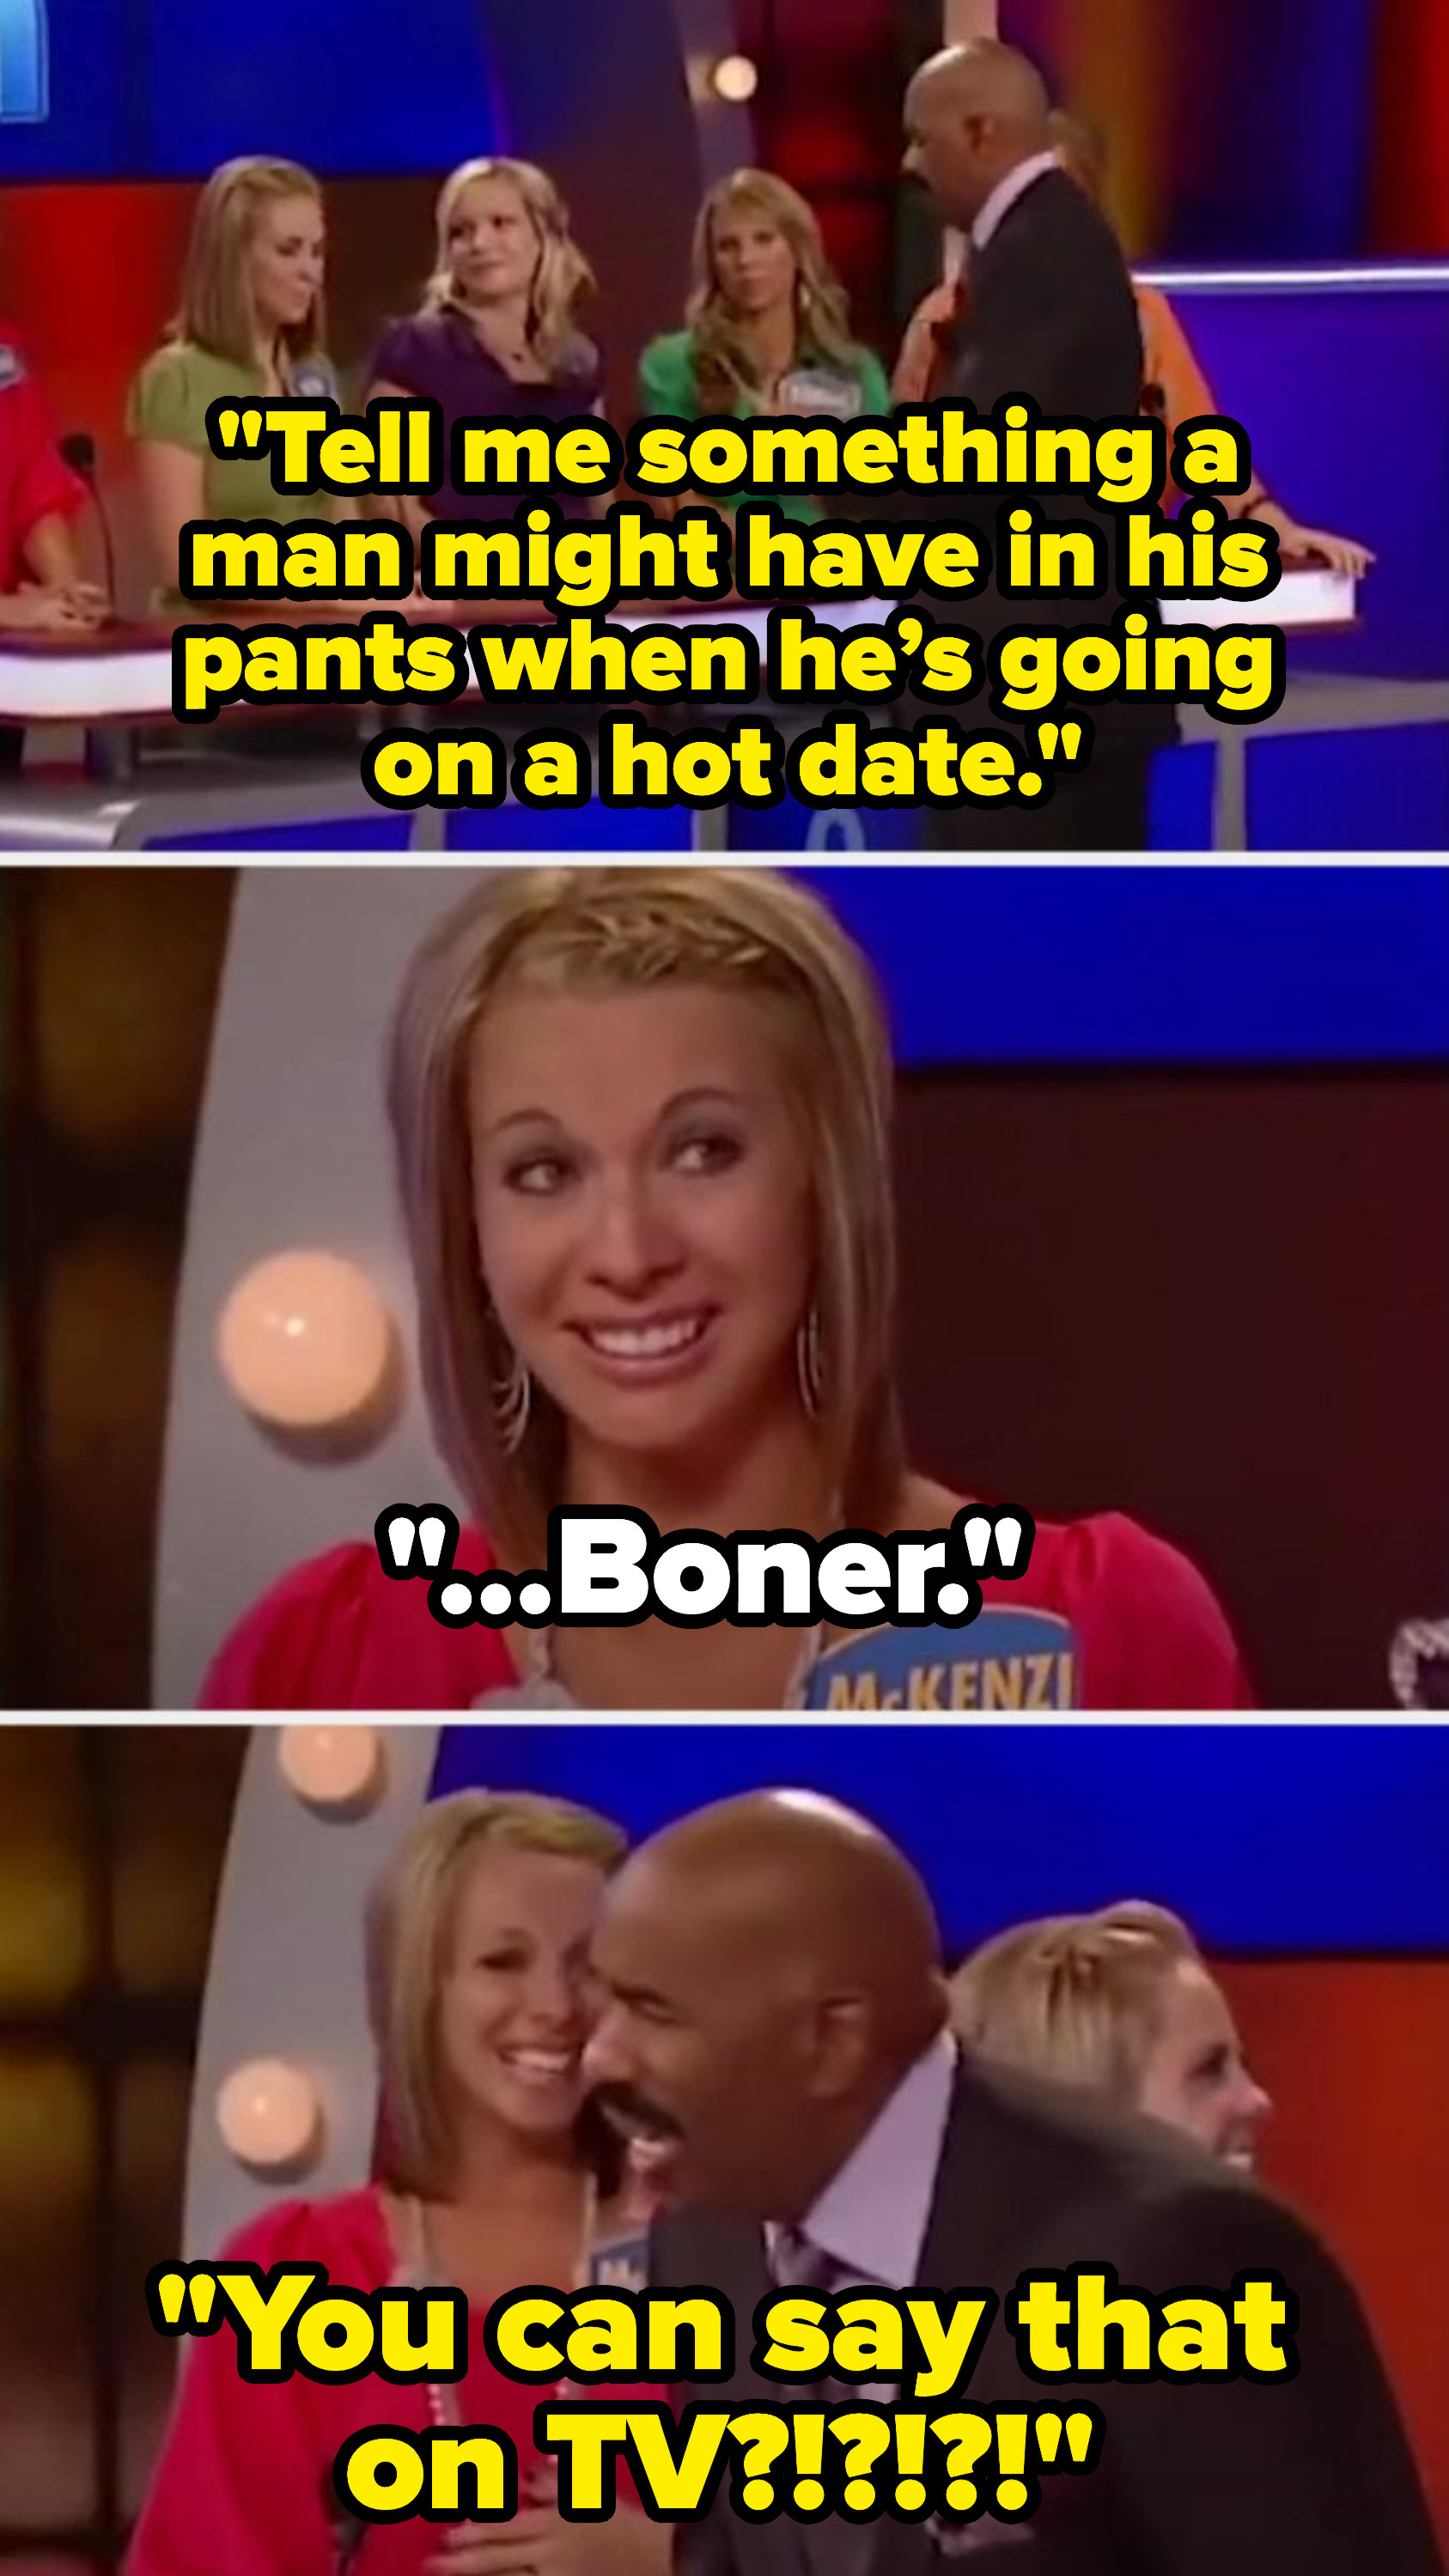 Steve says, &quot;Tell me something a man might have in his pants when he’s going on a hot date,&quot; and a contestant says, &quot;Boner,&quot; making Steve exclaim: &quot;You can say that on TV?!&quot;